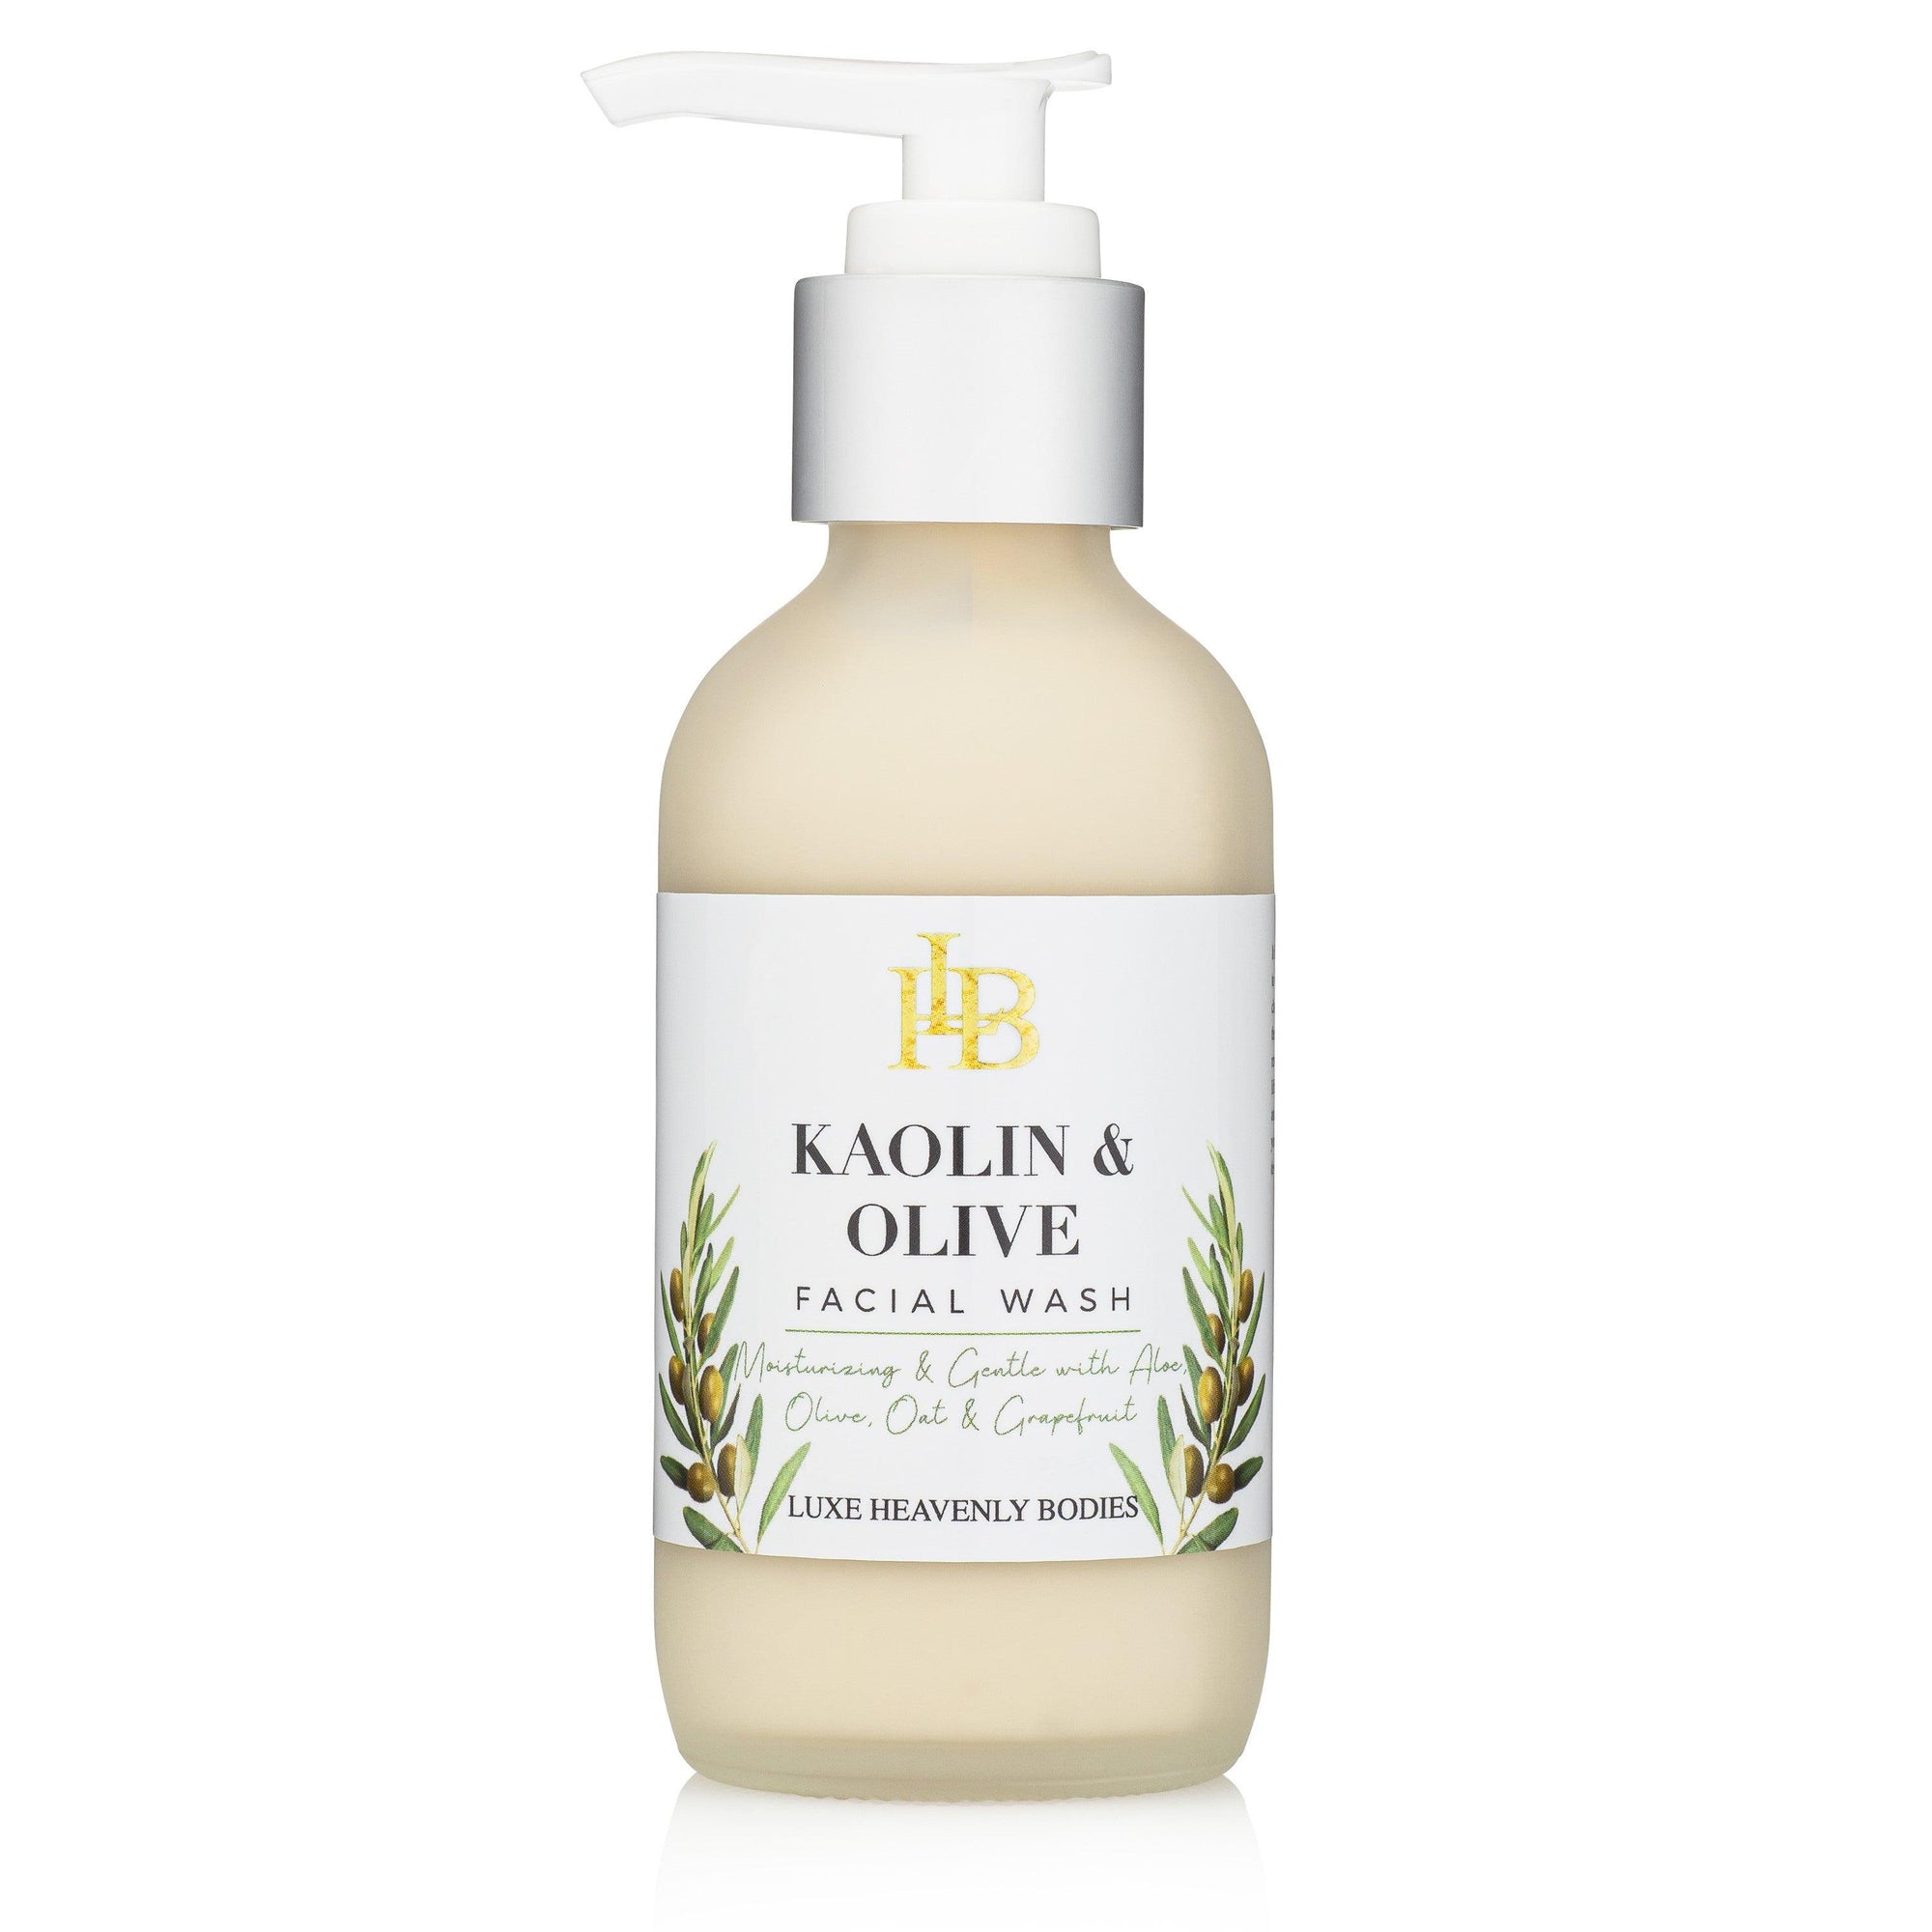 Kaolin & Olive Facial Wash - LUXE Heavenly Bodies